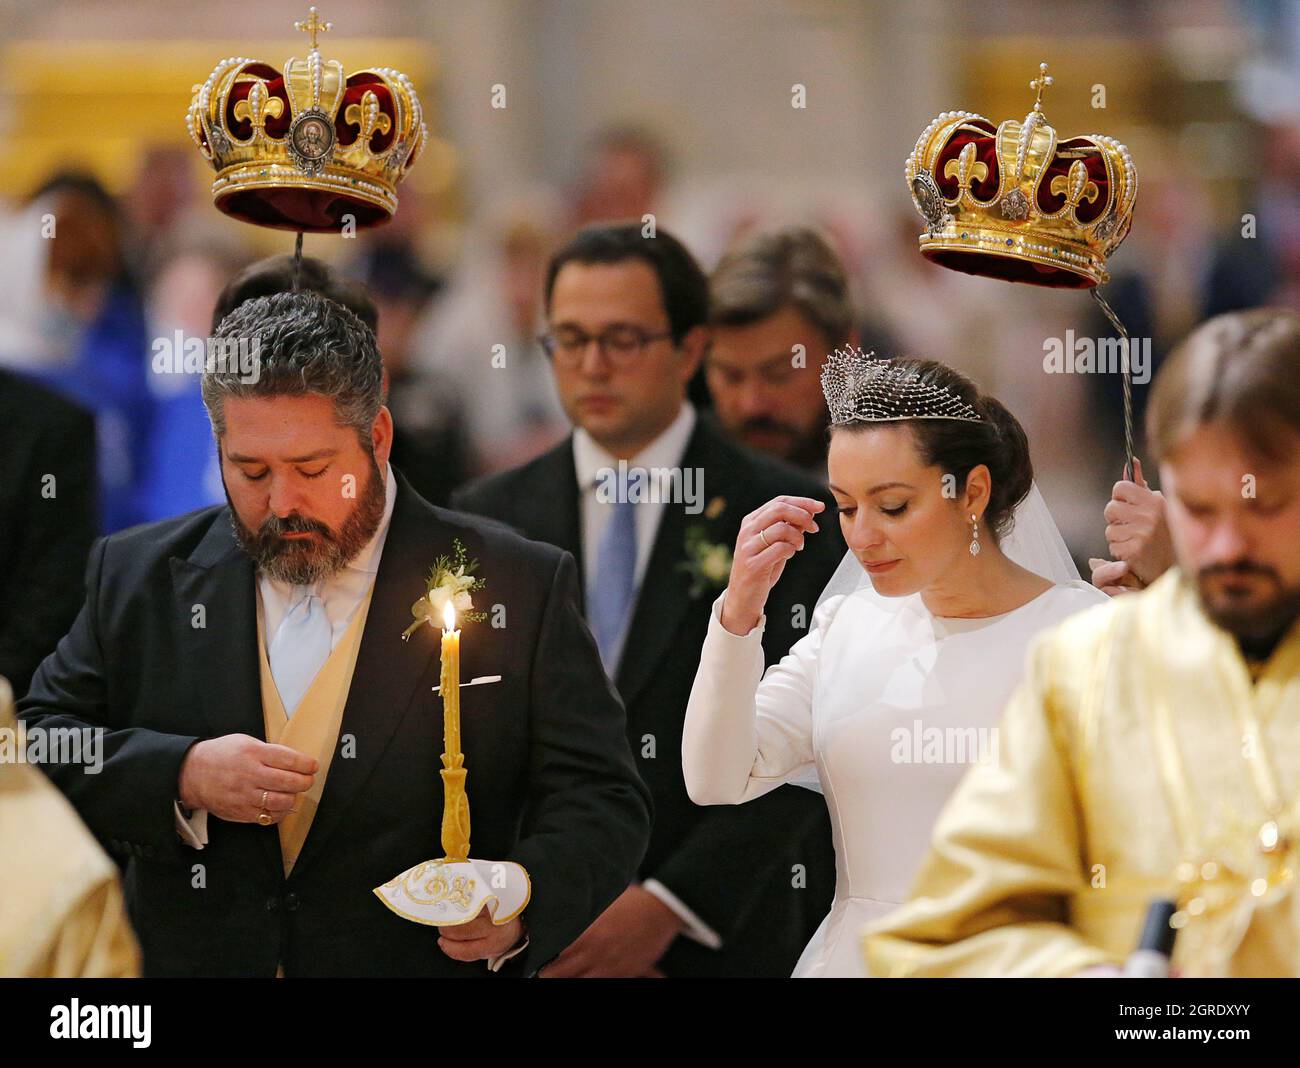 Grand Duke George Mikhailovich Romanov and Victoria Romanovna Bettarini  cross themselves during their wedding ceremony at St. Isaac's Cathedral in  Saint Petersburg, Russia October 1, 2021. REUTERS/Anton Vaganov Stock Photo  - Alamy